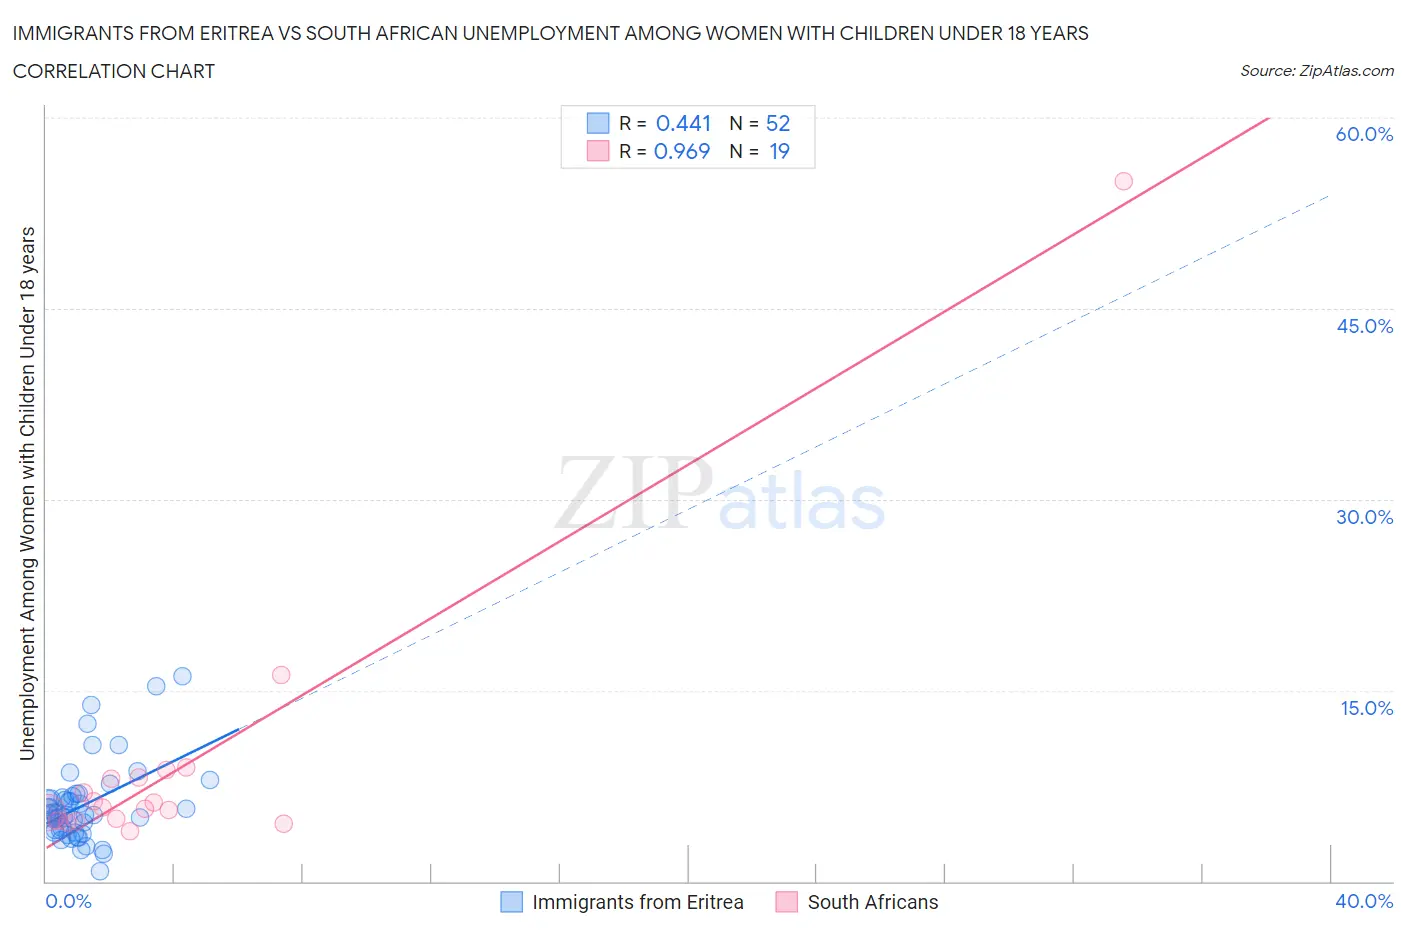 Immigrants from Eritrea vs South African Unemployment Among Women with Children Under 18 years